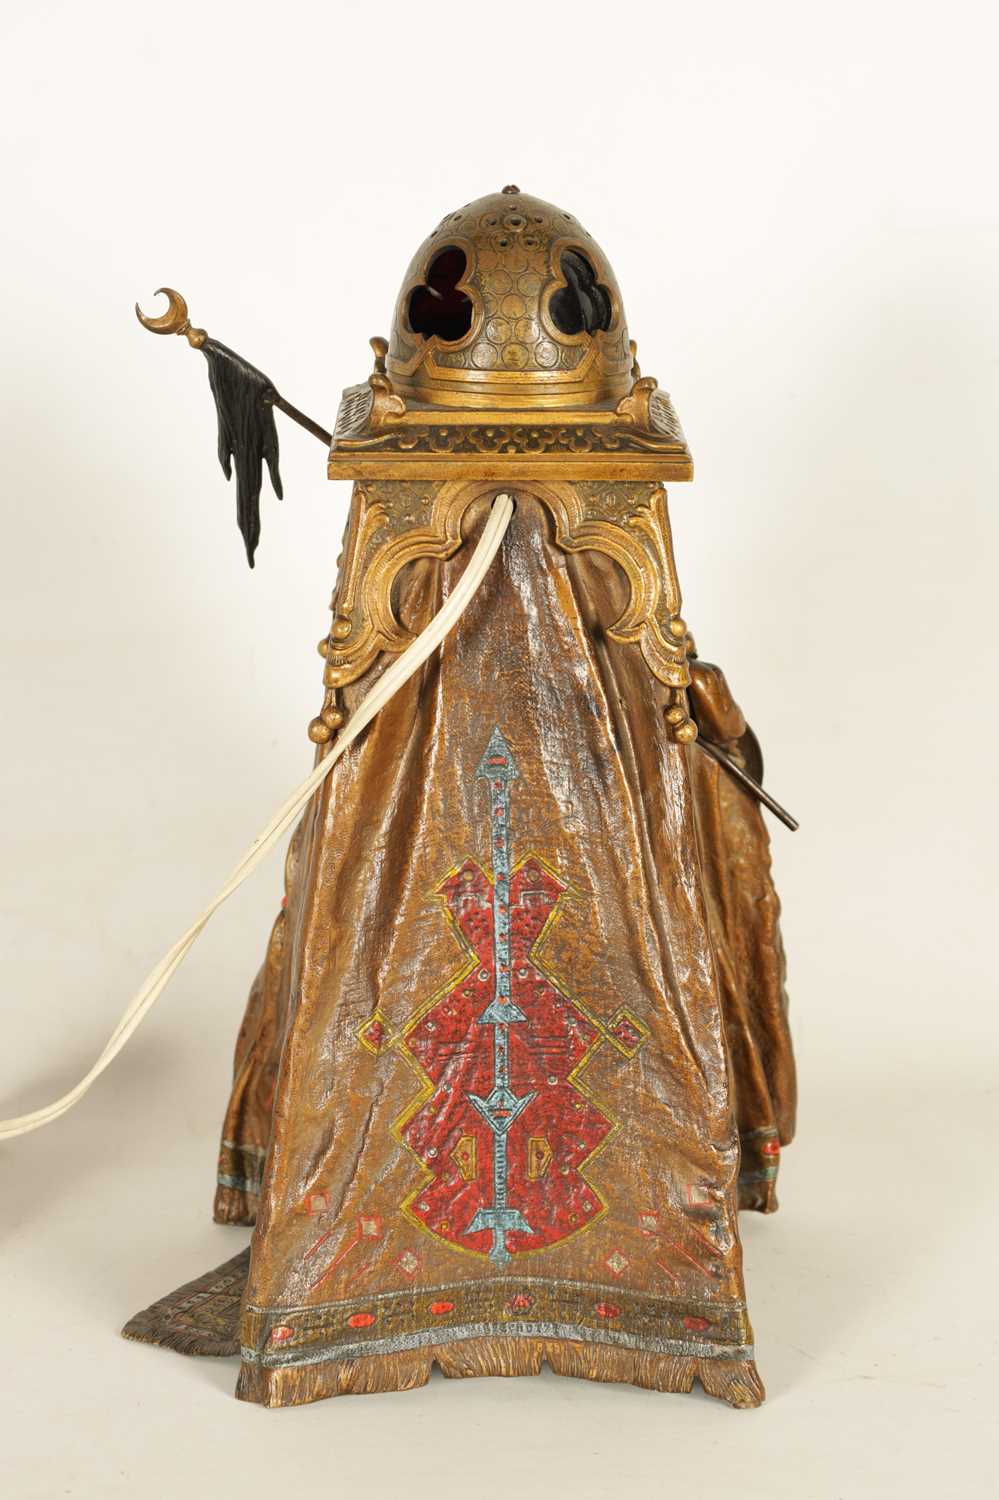 FRANZ BERGMAN. AN EARLY 20TH CENTURY AUSTRIAN COLD-PAINTED BRONZE ORIENTALIST TABLE LAMP - Image 9 of 18